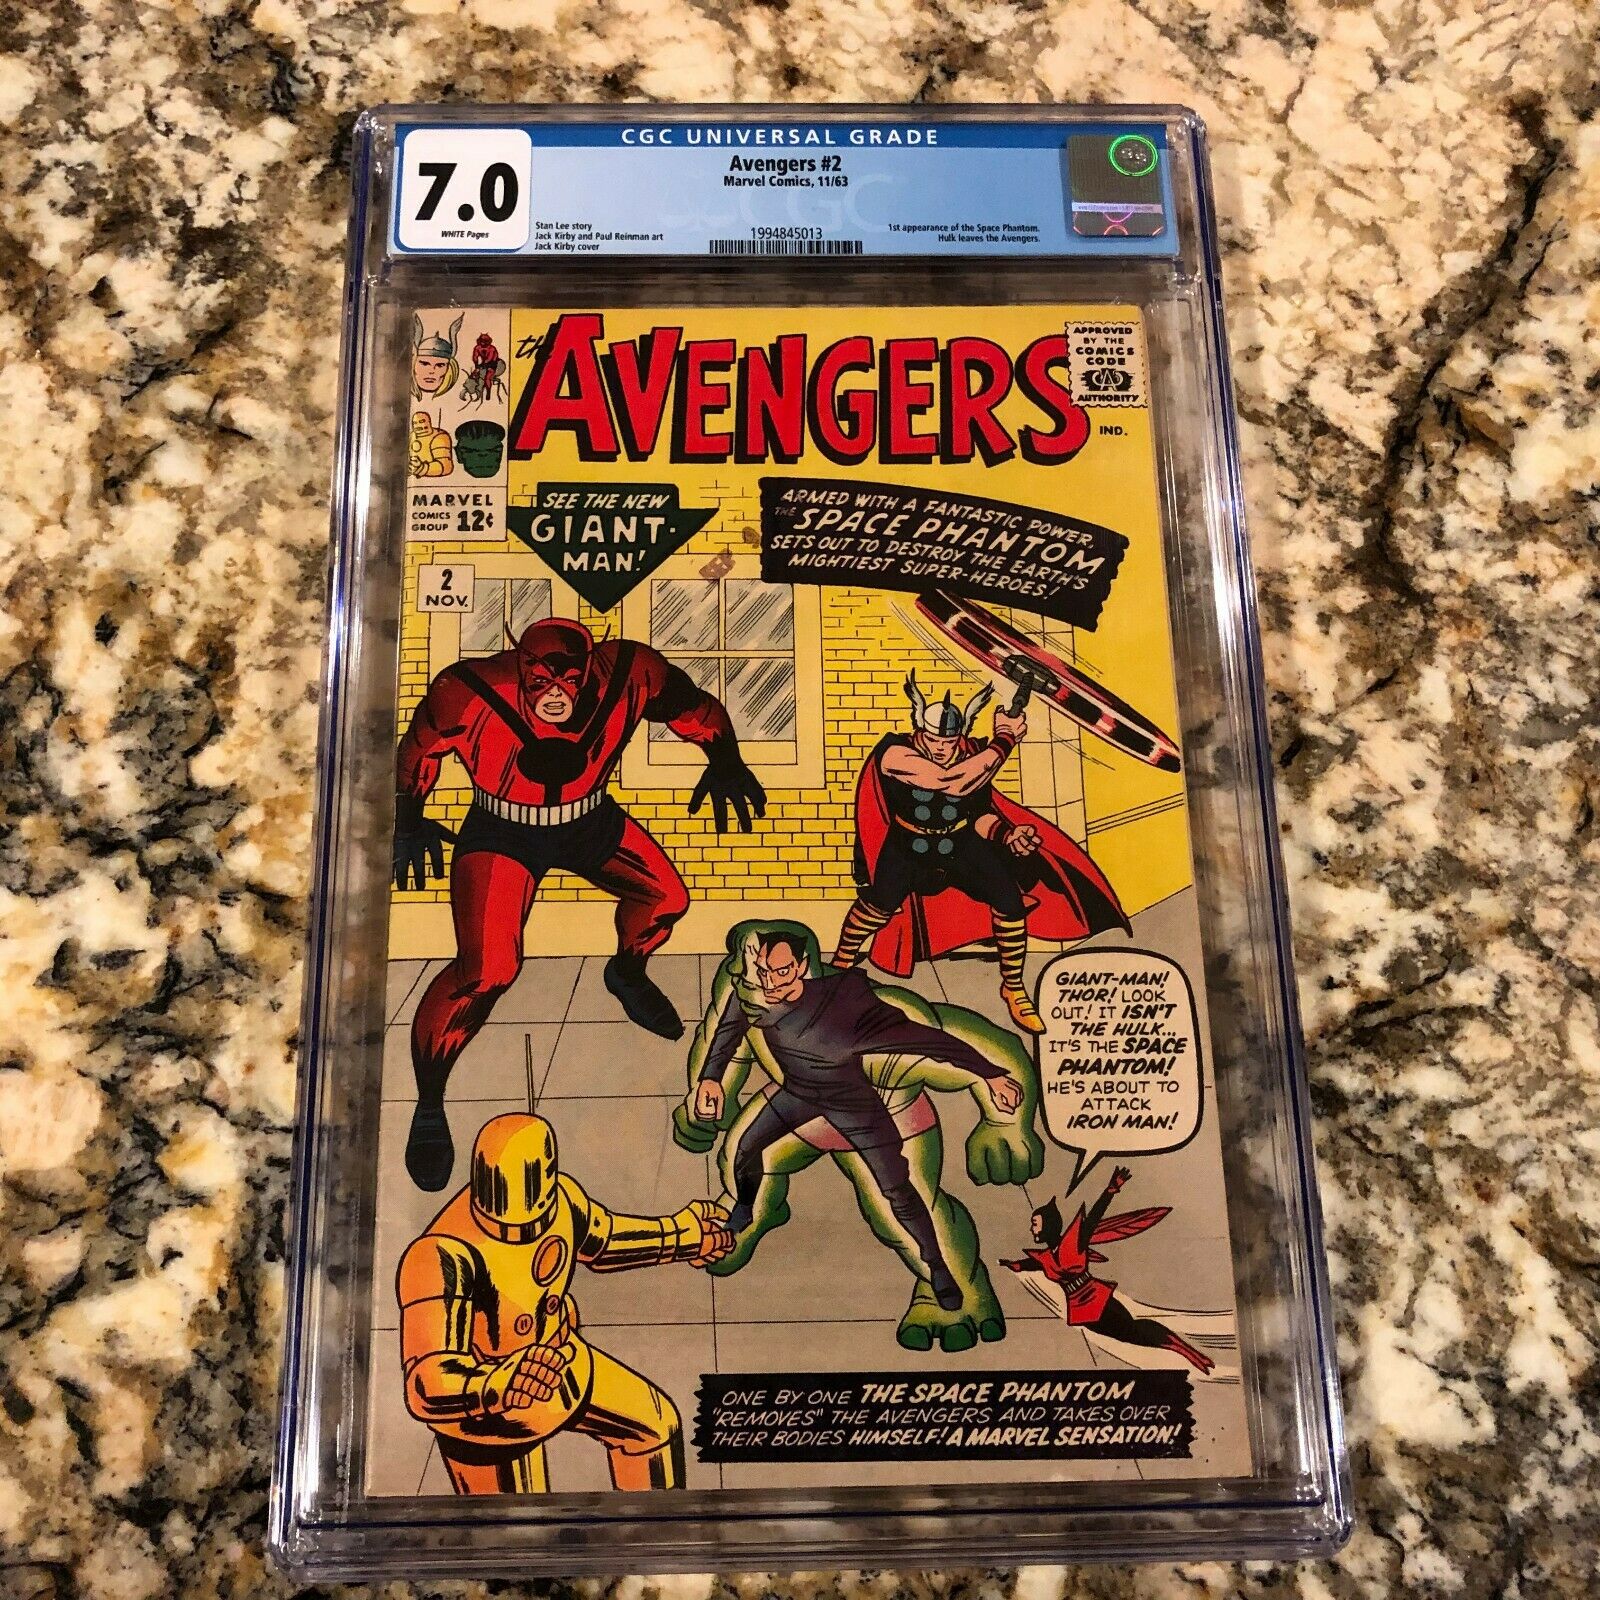 AVENGERS 2 CGC 70 RARE WHITE PAGES SUPER HIGH END NEW MCU MOVIES HULK LEAVES